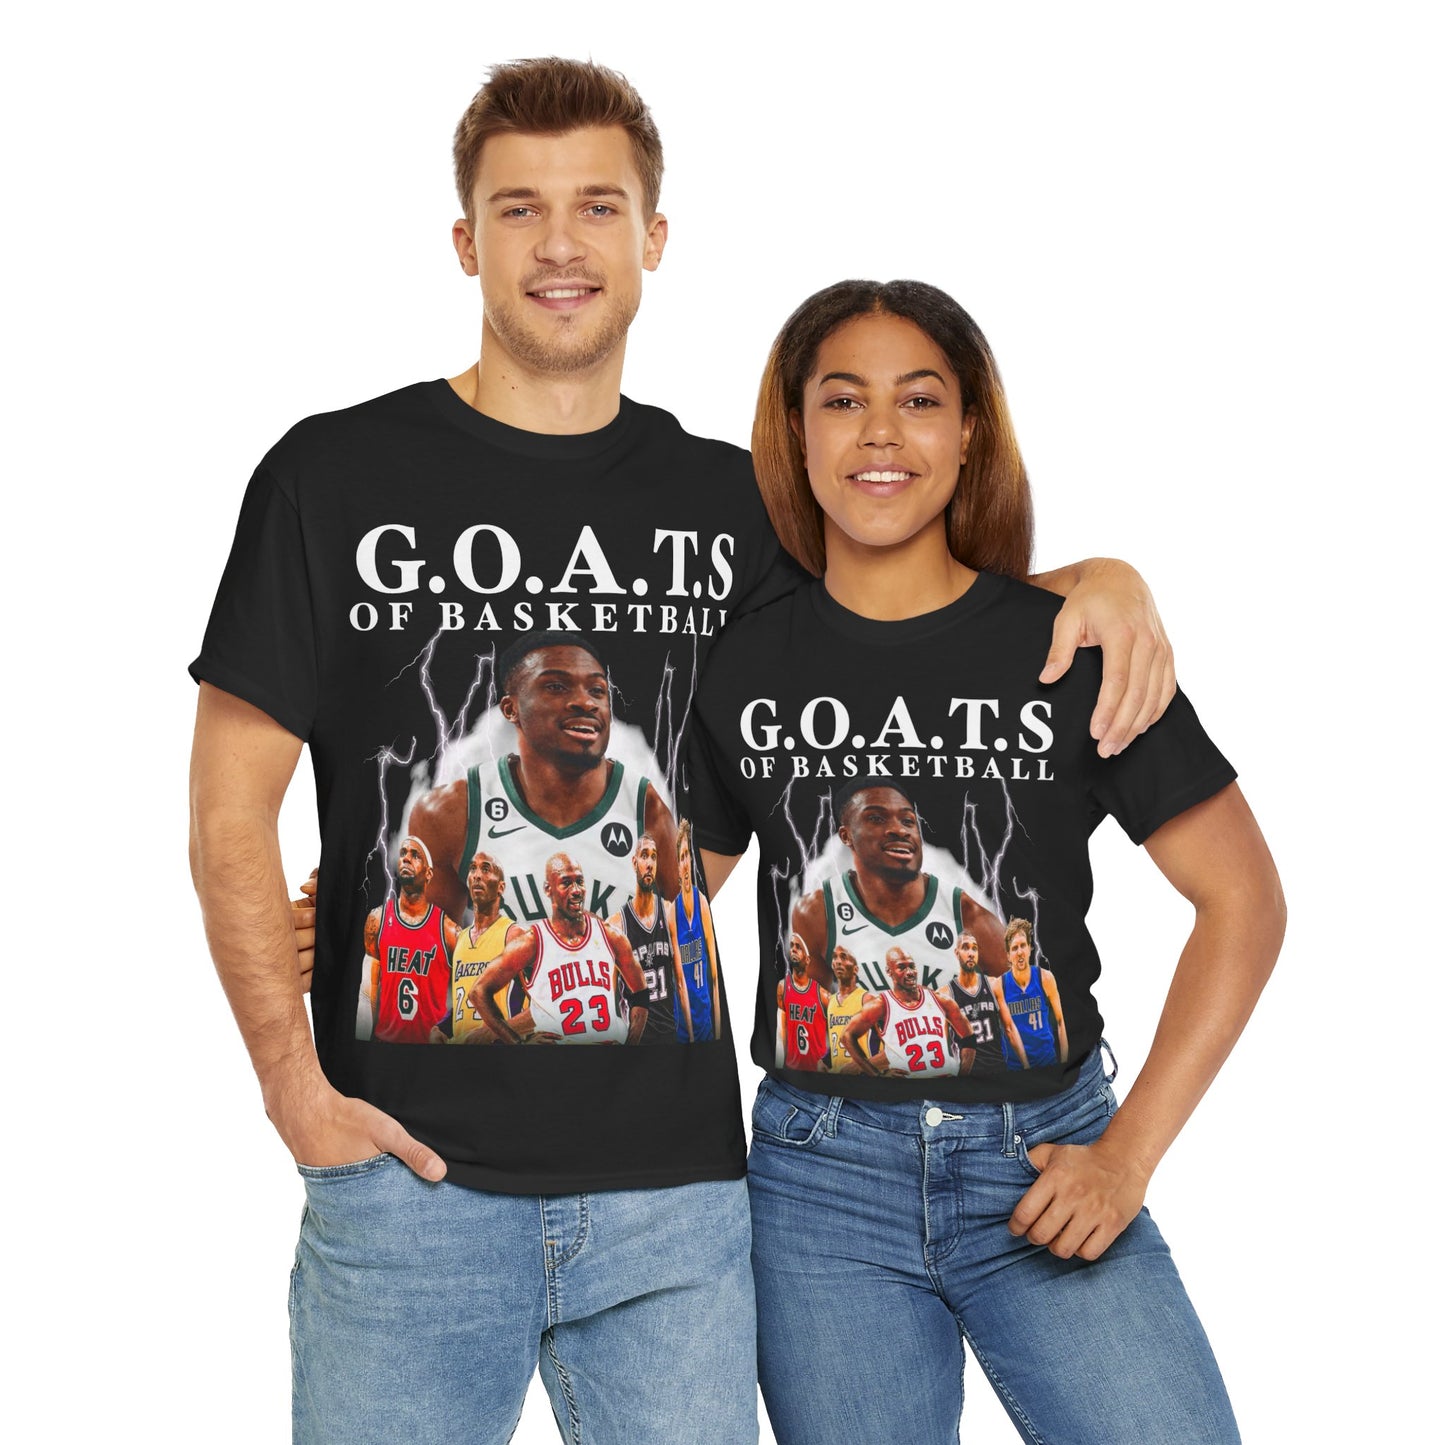 G.O.A.T.S of Basketball